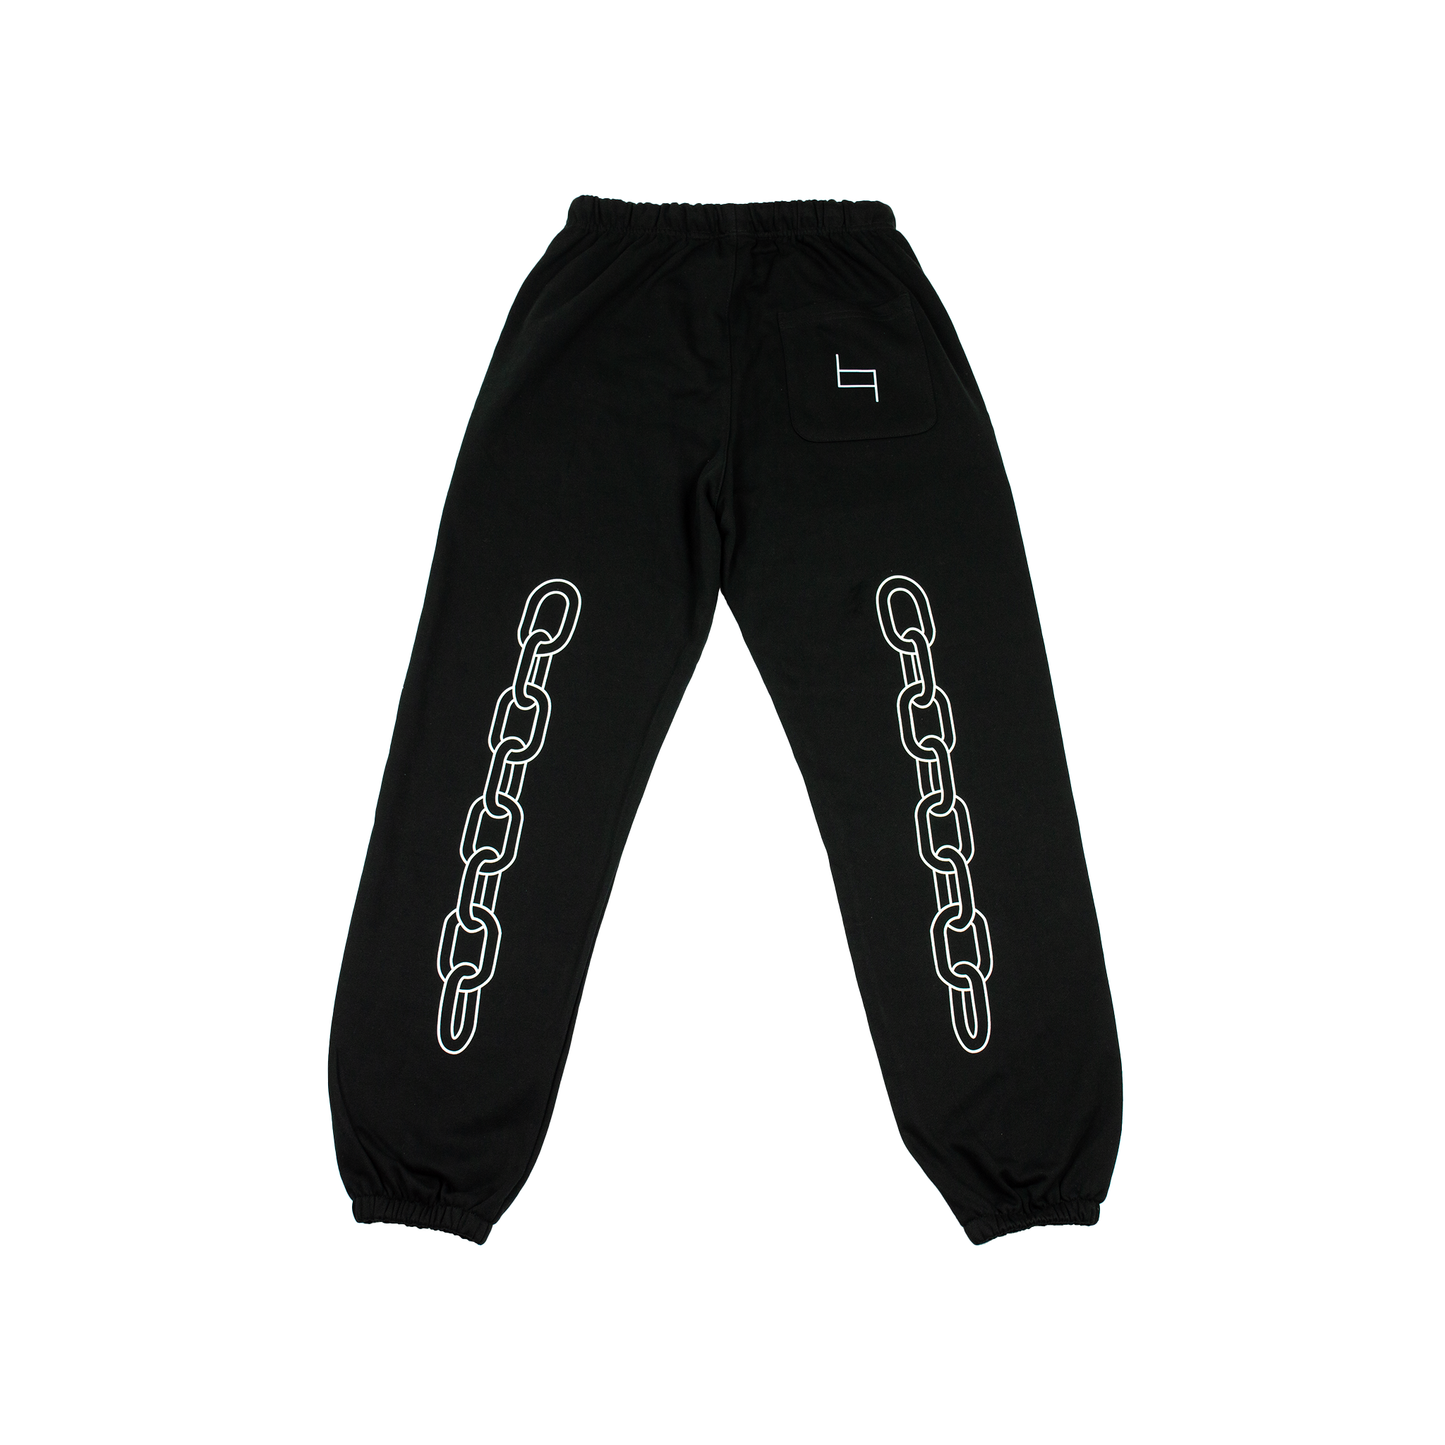 THE WALK TO FREEDOM JOGGERS